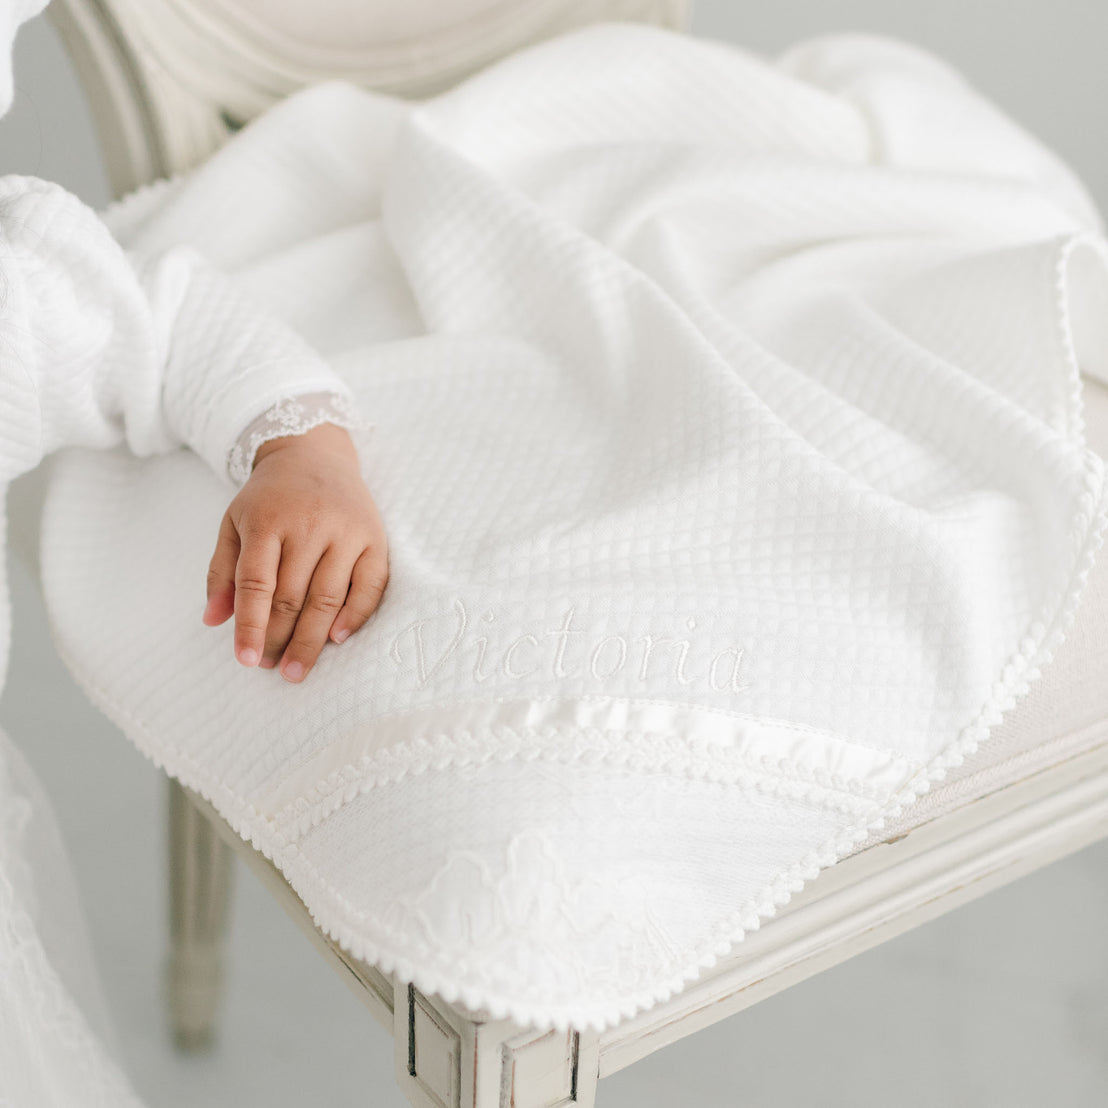 Alternative photo of the Victoria personalized baptism blanket on chair. Baby girls hand resting on corner. 